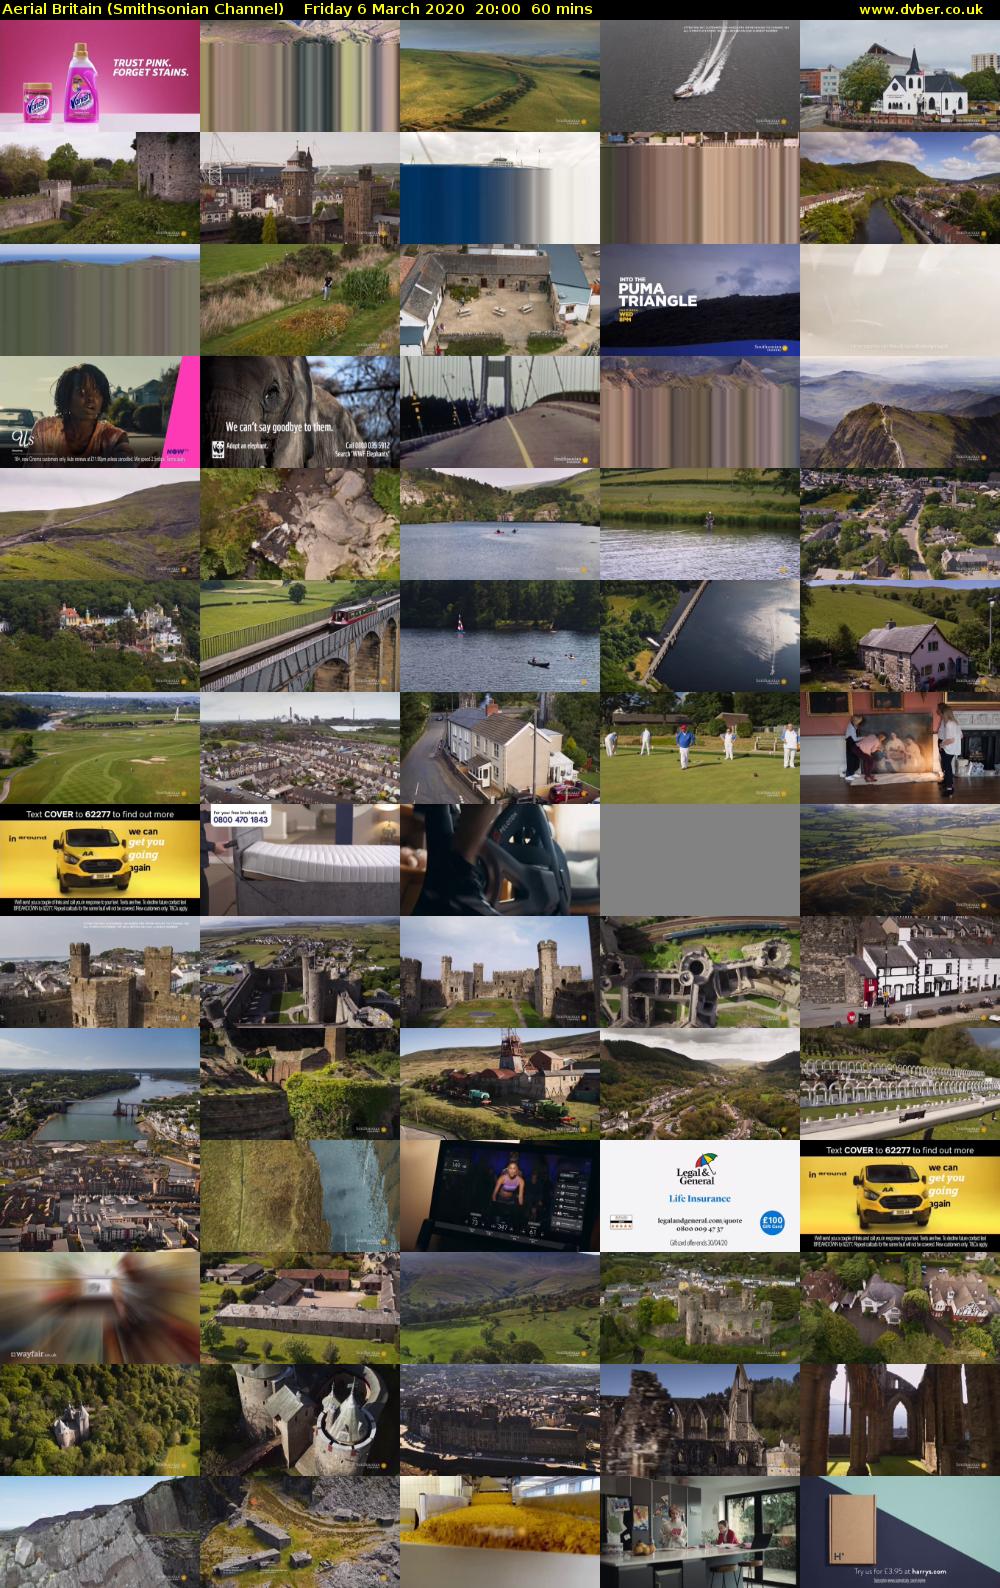 Aerial Britain (Smithsonian Channel) Friday 6 March 2020 20:00 - 21:00